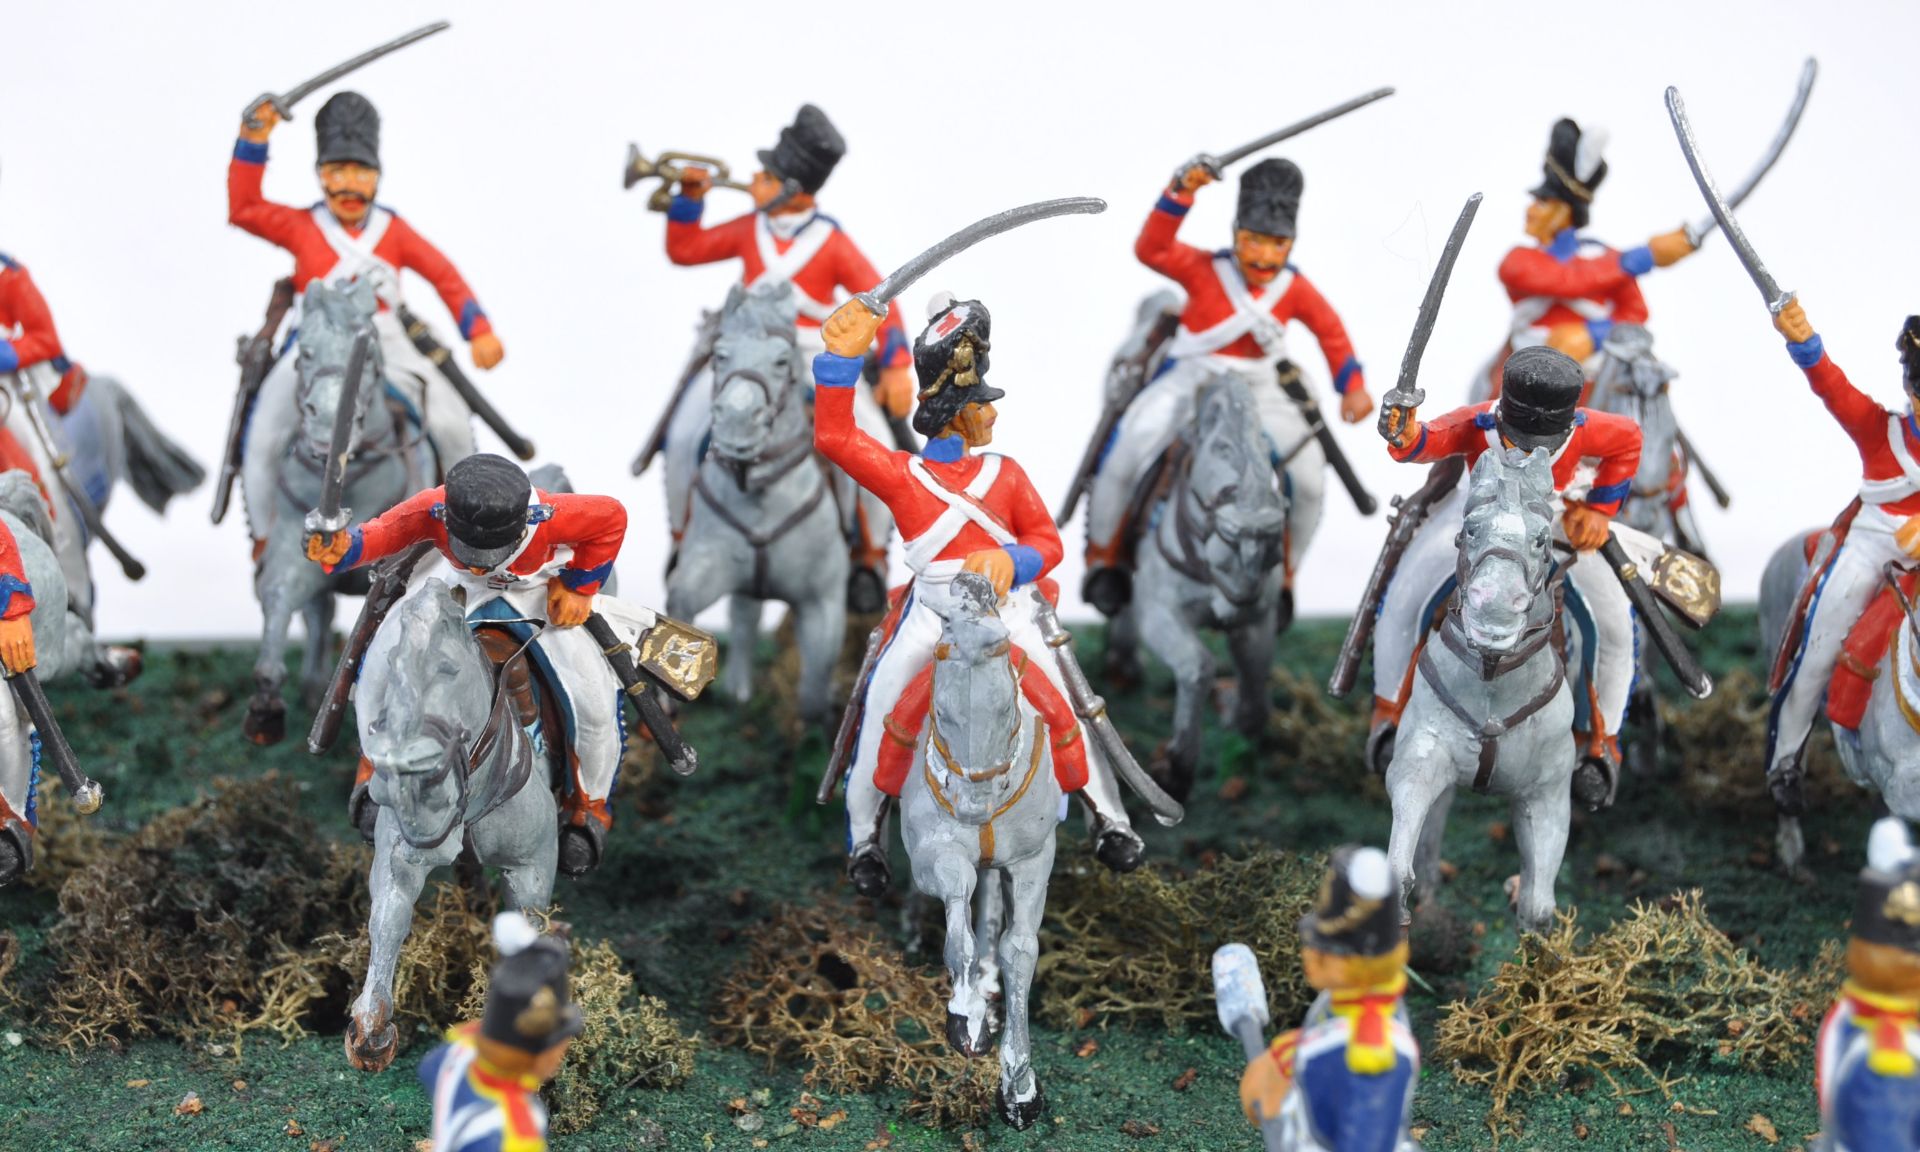 COLLECTION OF 1/32 SCALE PLASTIC NAPOLEONIC SOLDIER FIGURES - Image 3 of 5